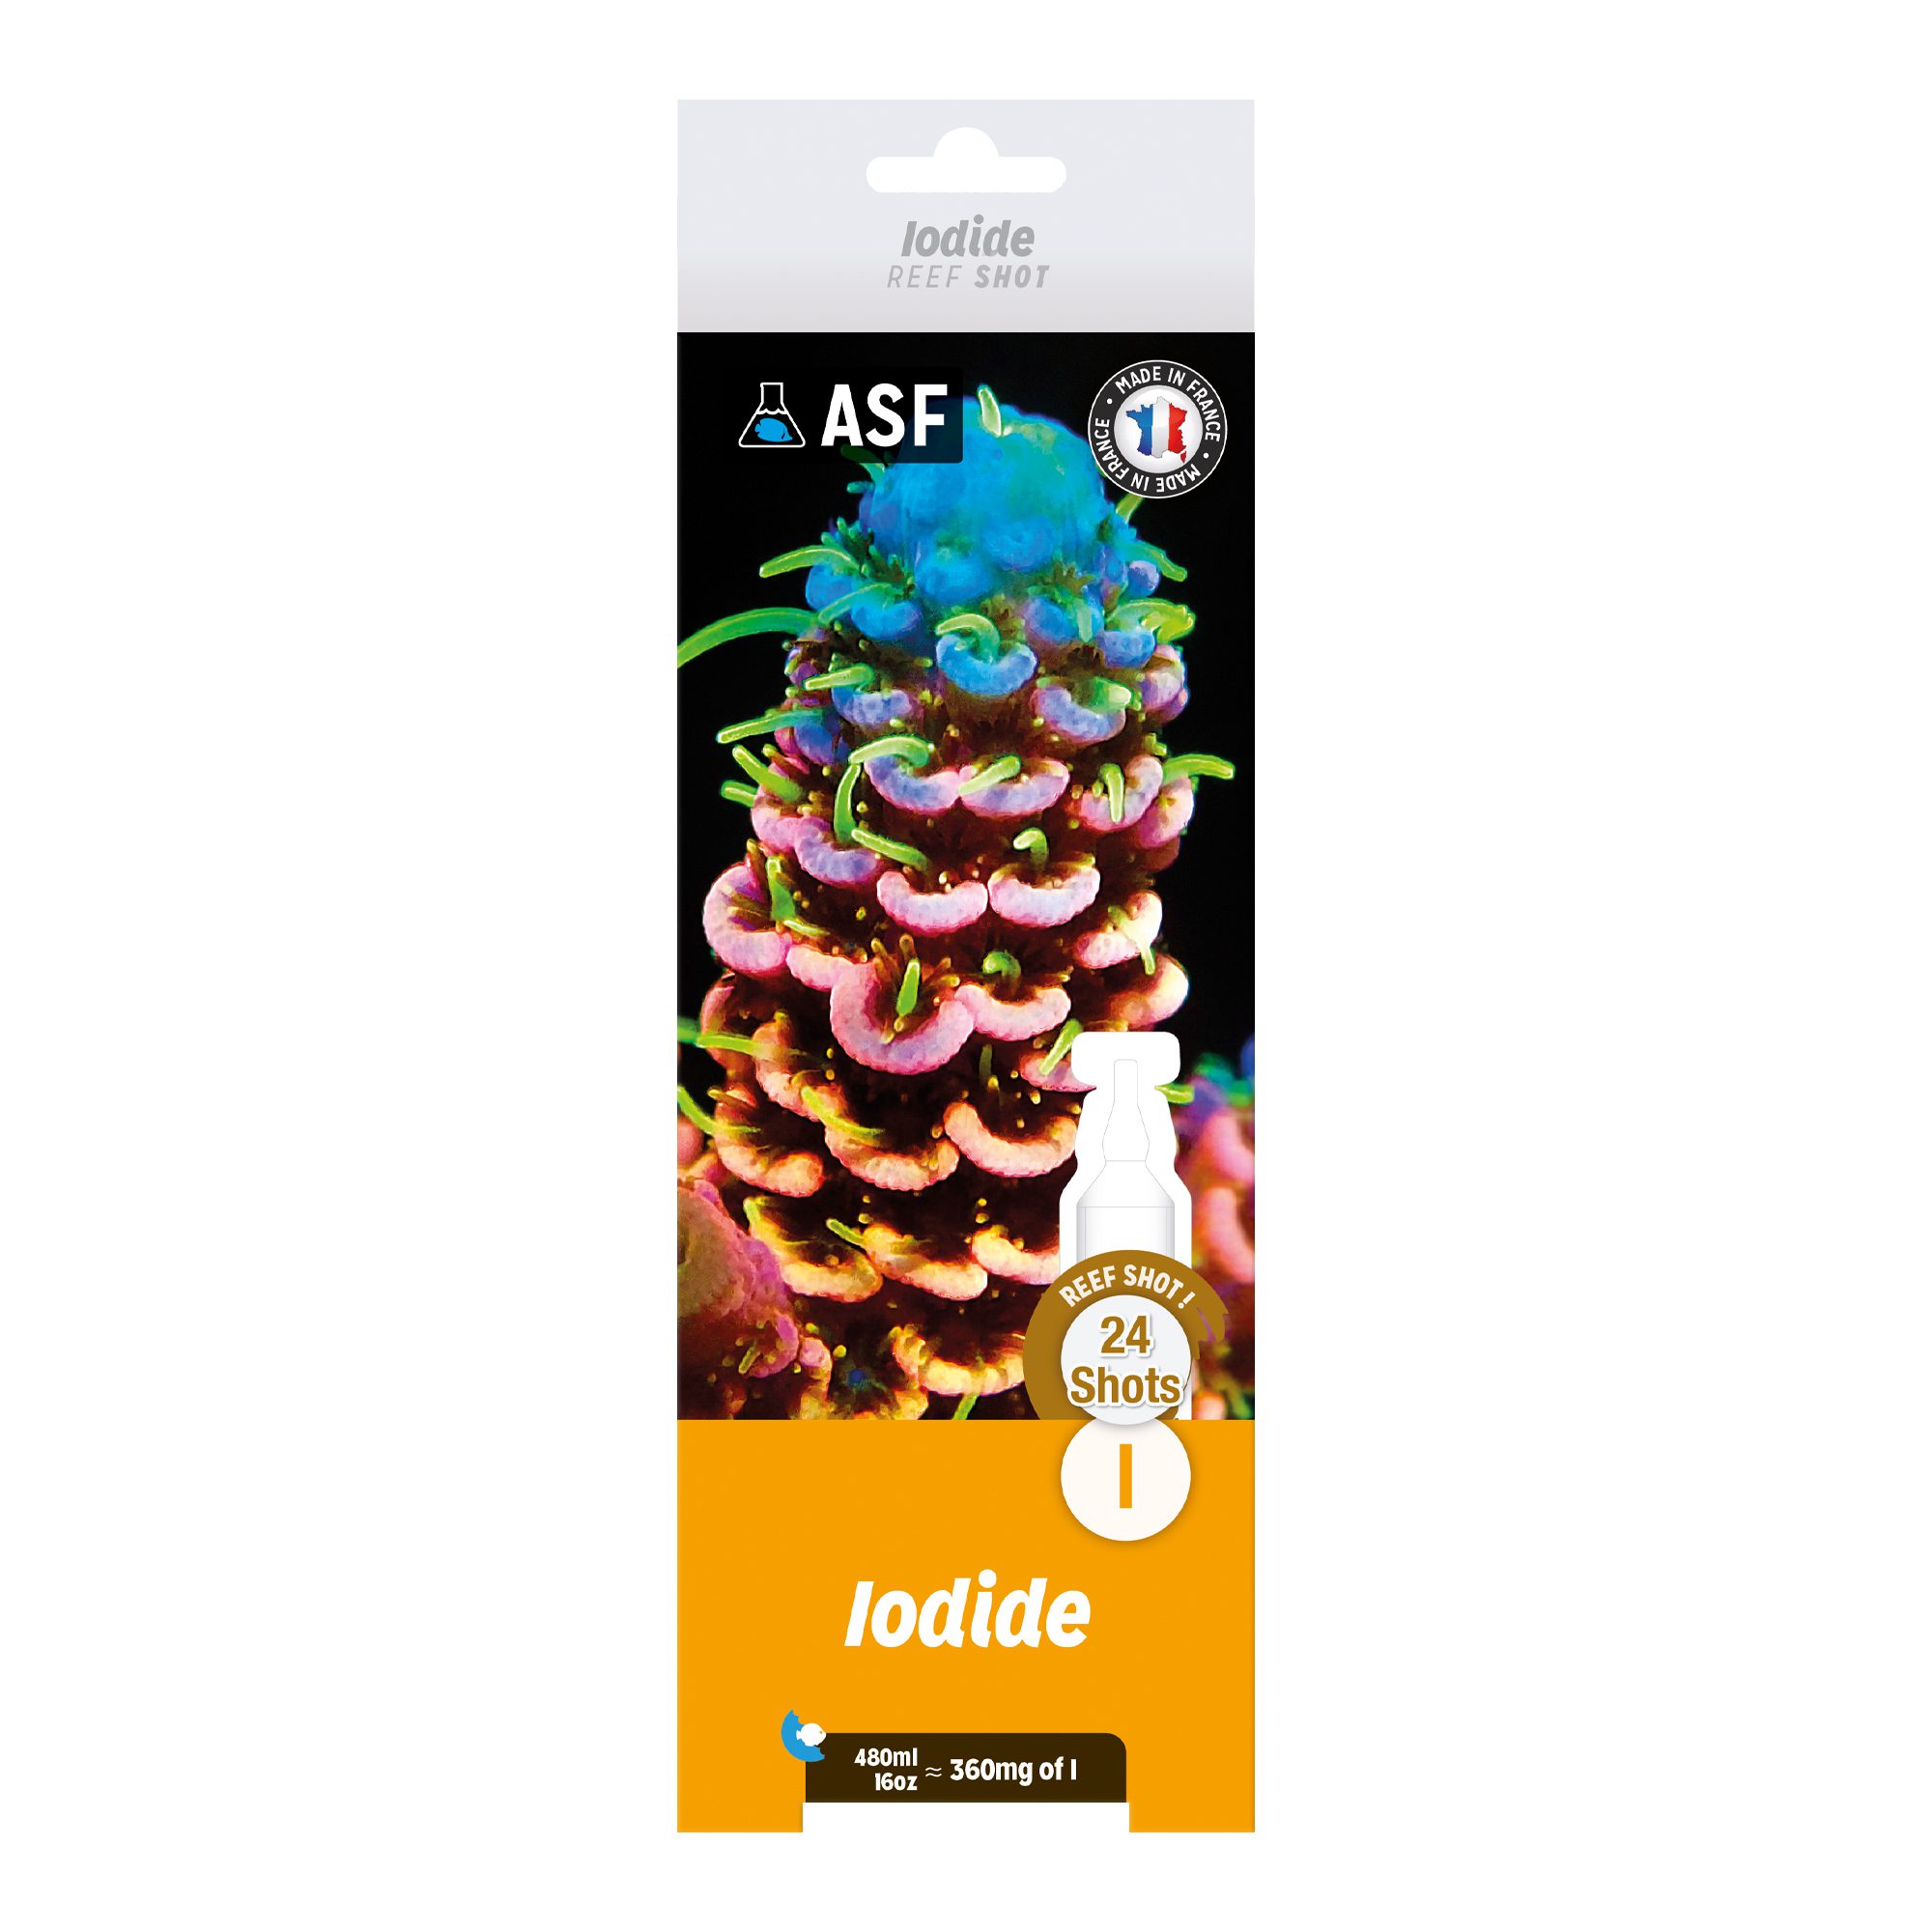 AS Iodide Reef Shots 24 pack 480ml